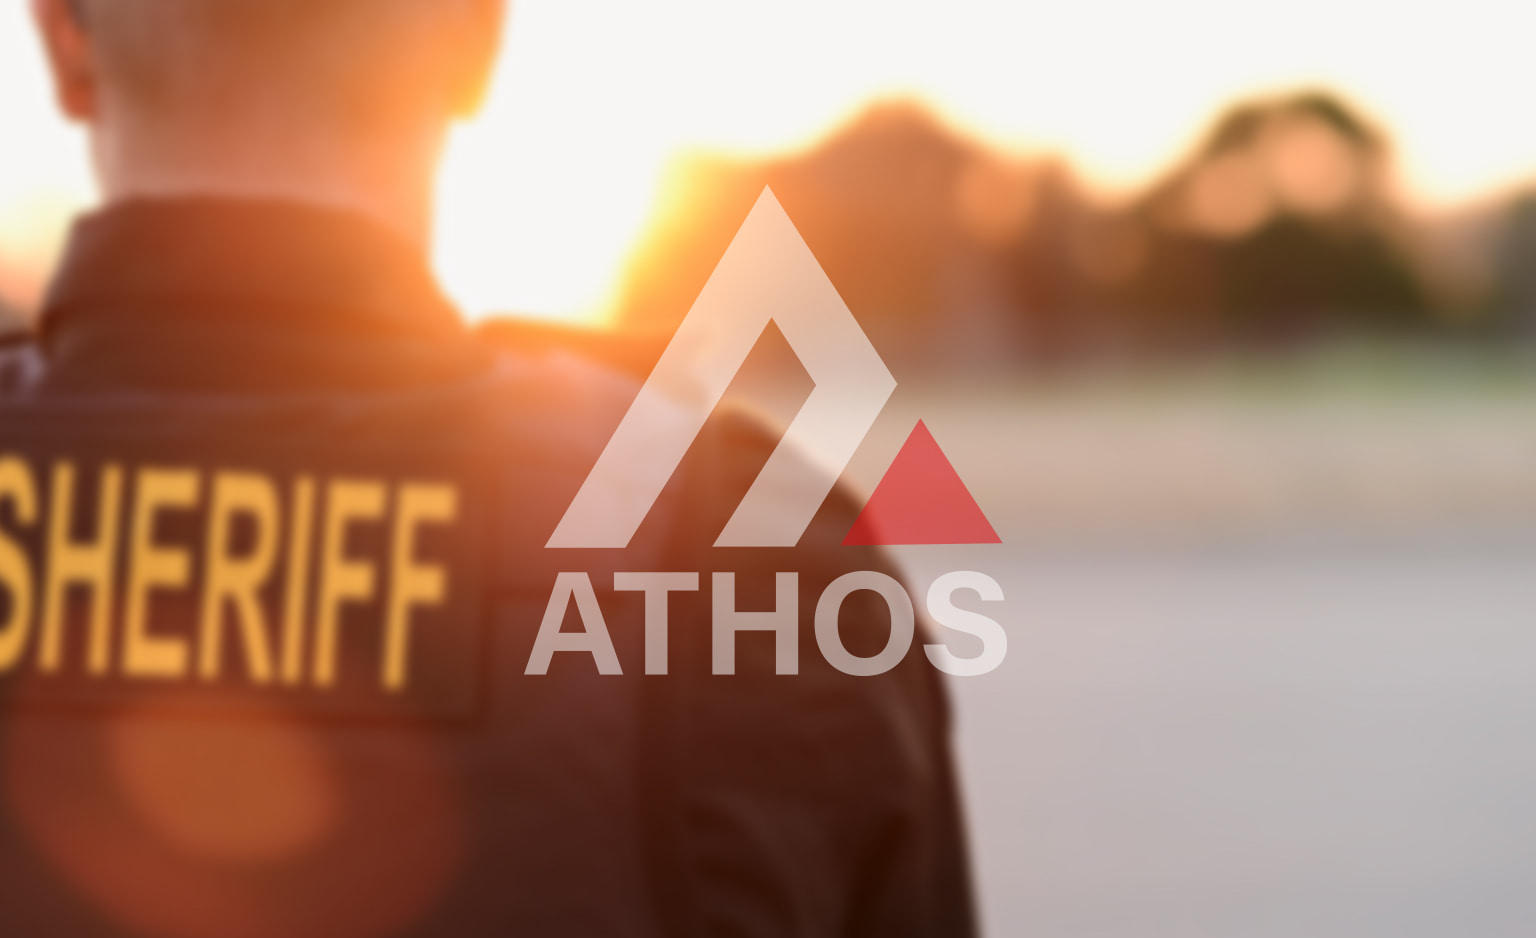 Ten-four. Concepts in Progress. Agency Creative secures win with National Security firm Athos Group.